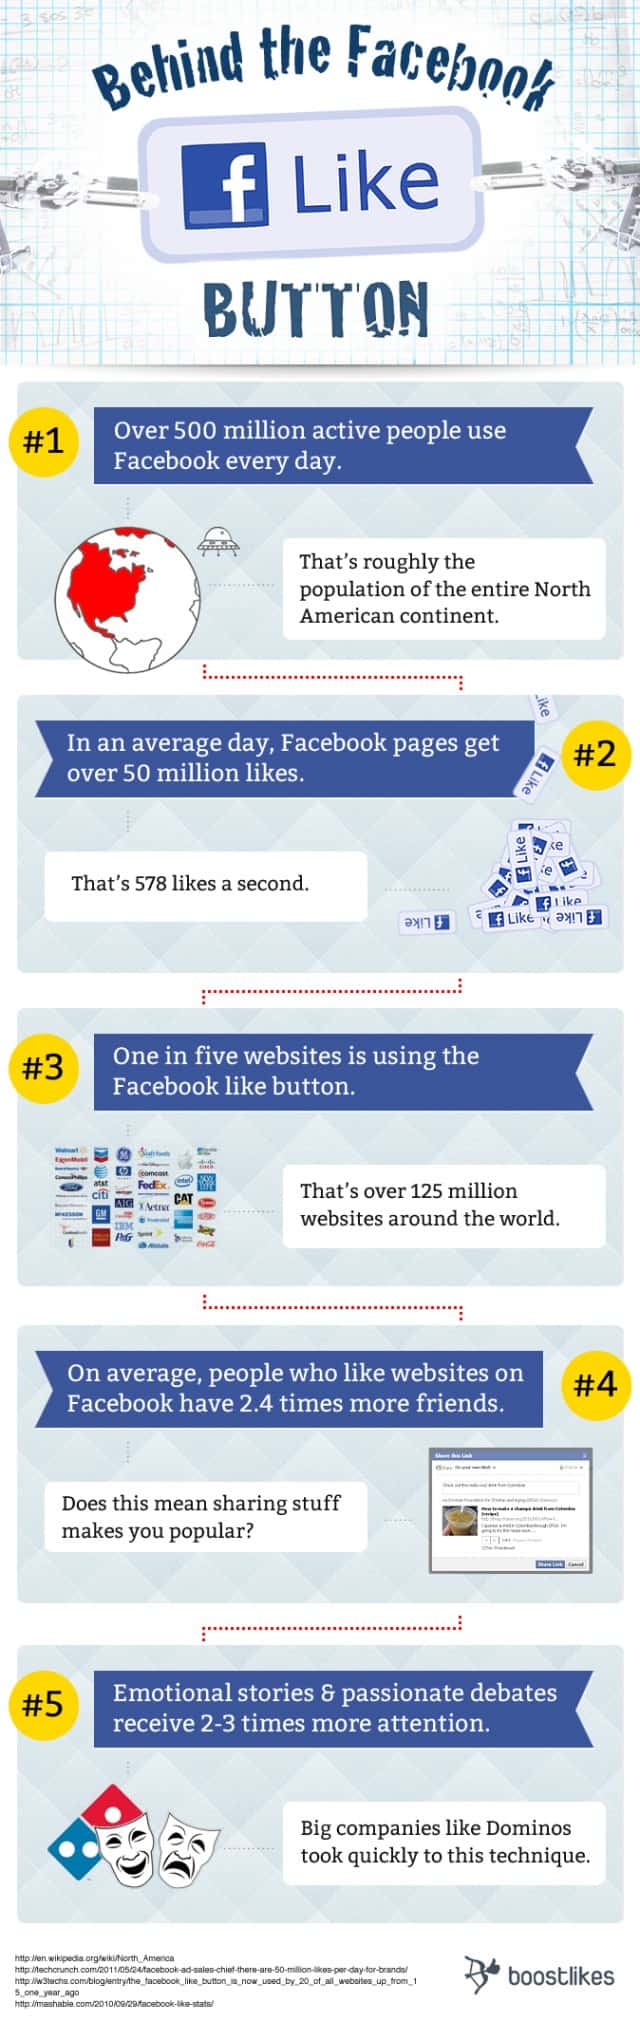 Behind the Facebook Like Button